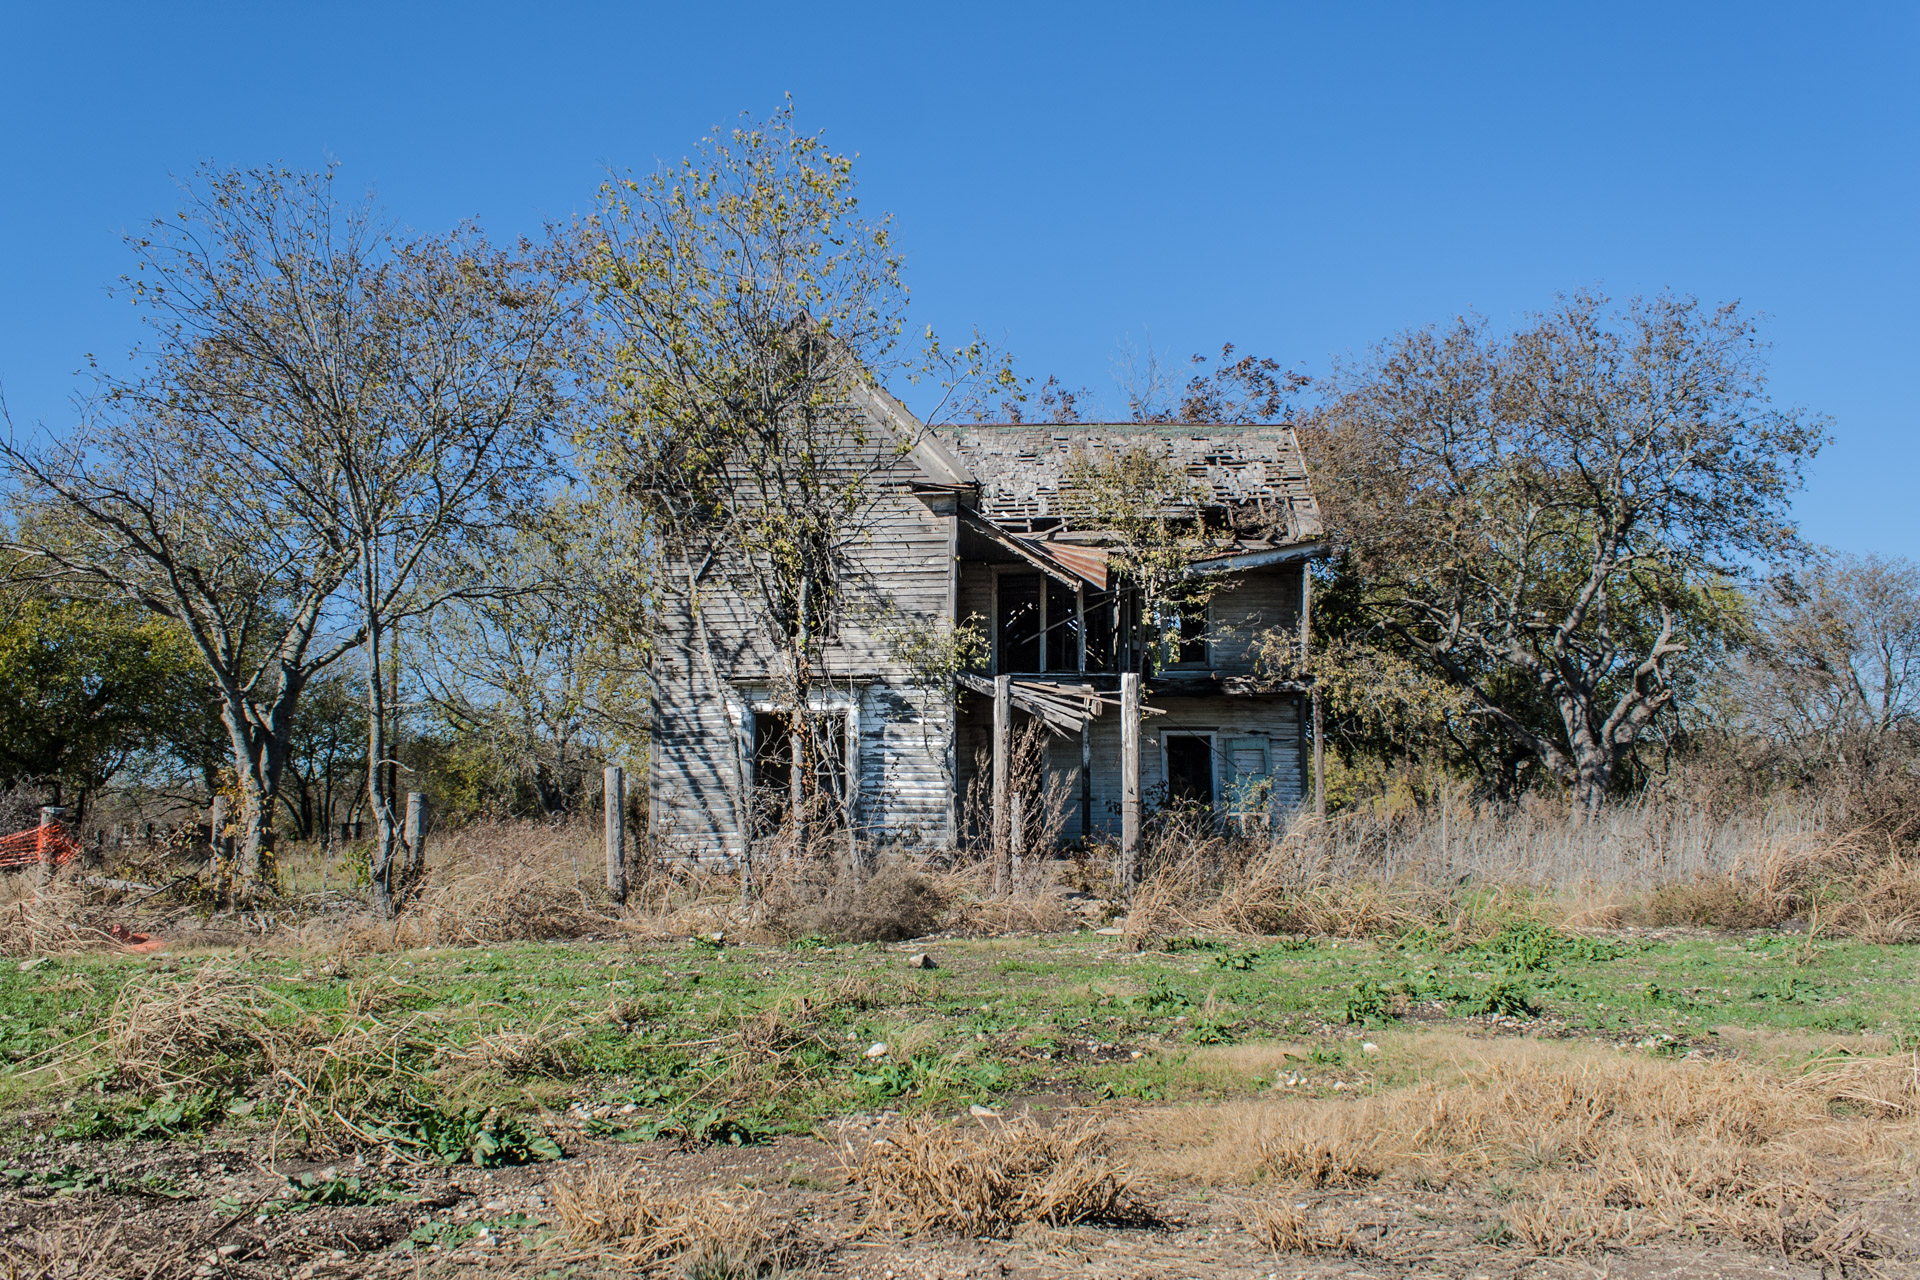 Bruceville-Eddy, Texas - Wide Open Two Story House (front far)